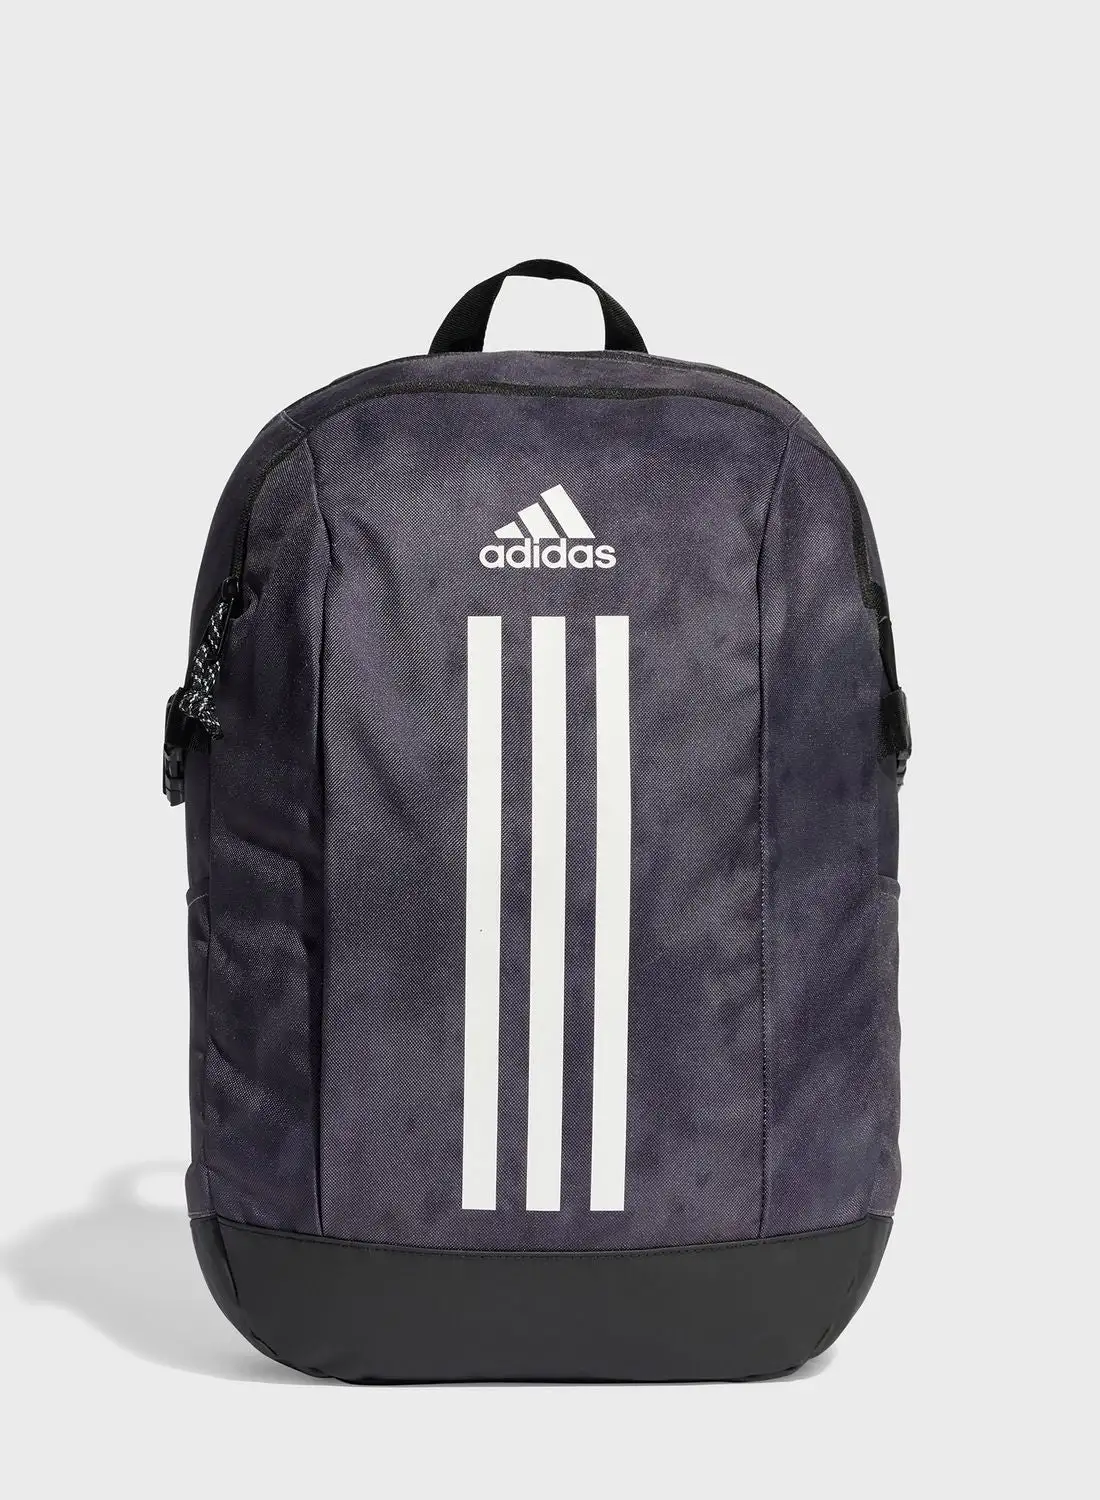 Adidas Power Graphics Backpack